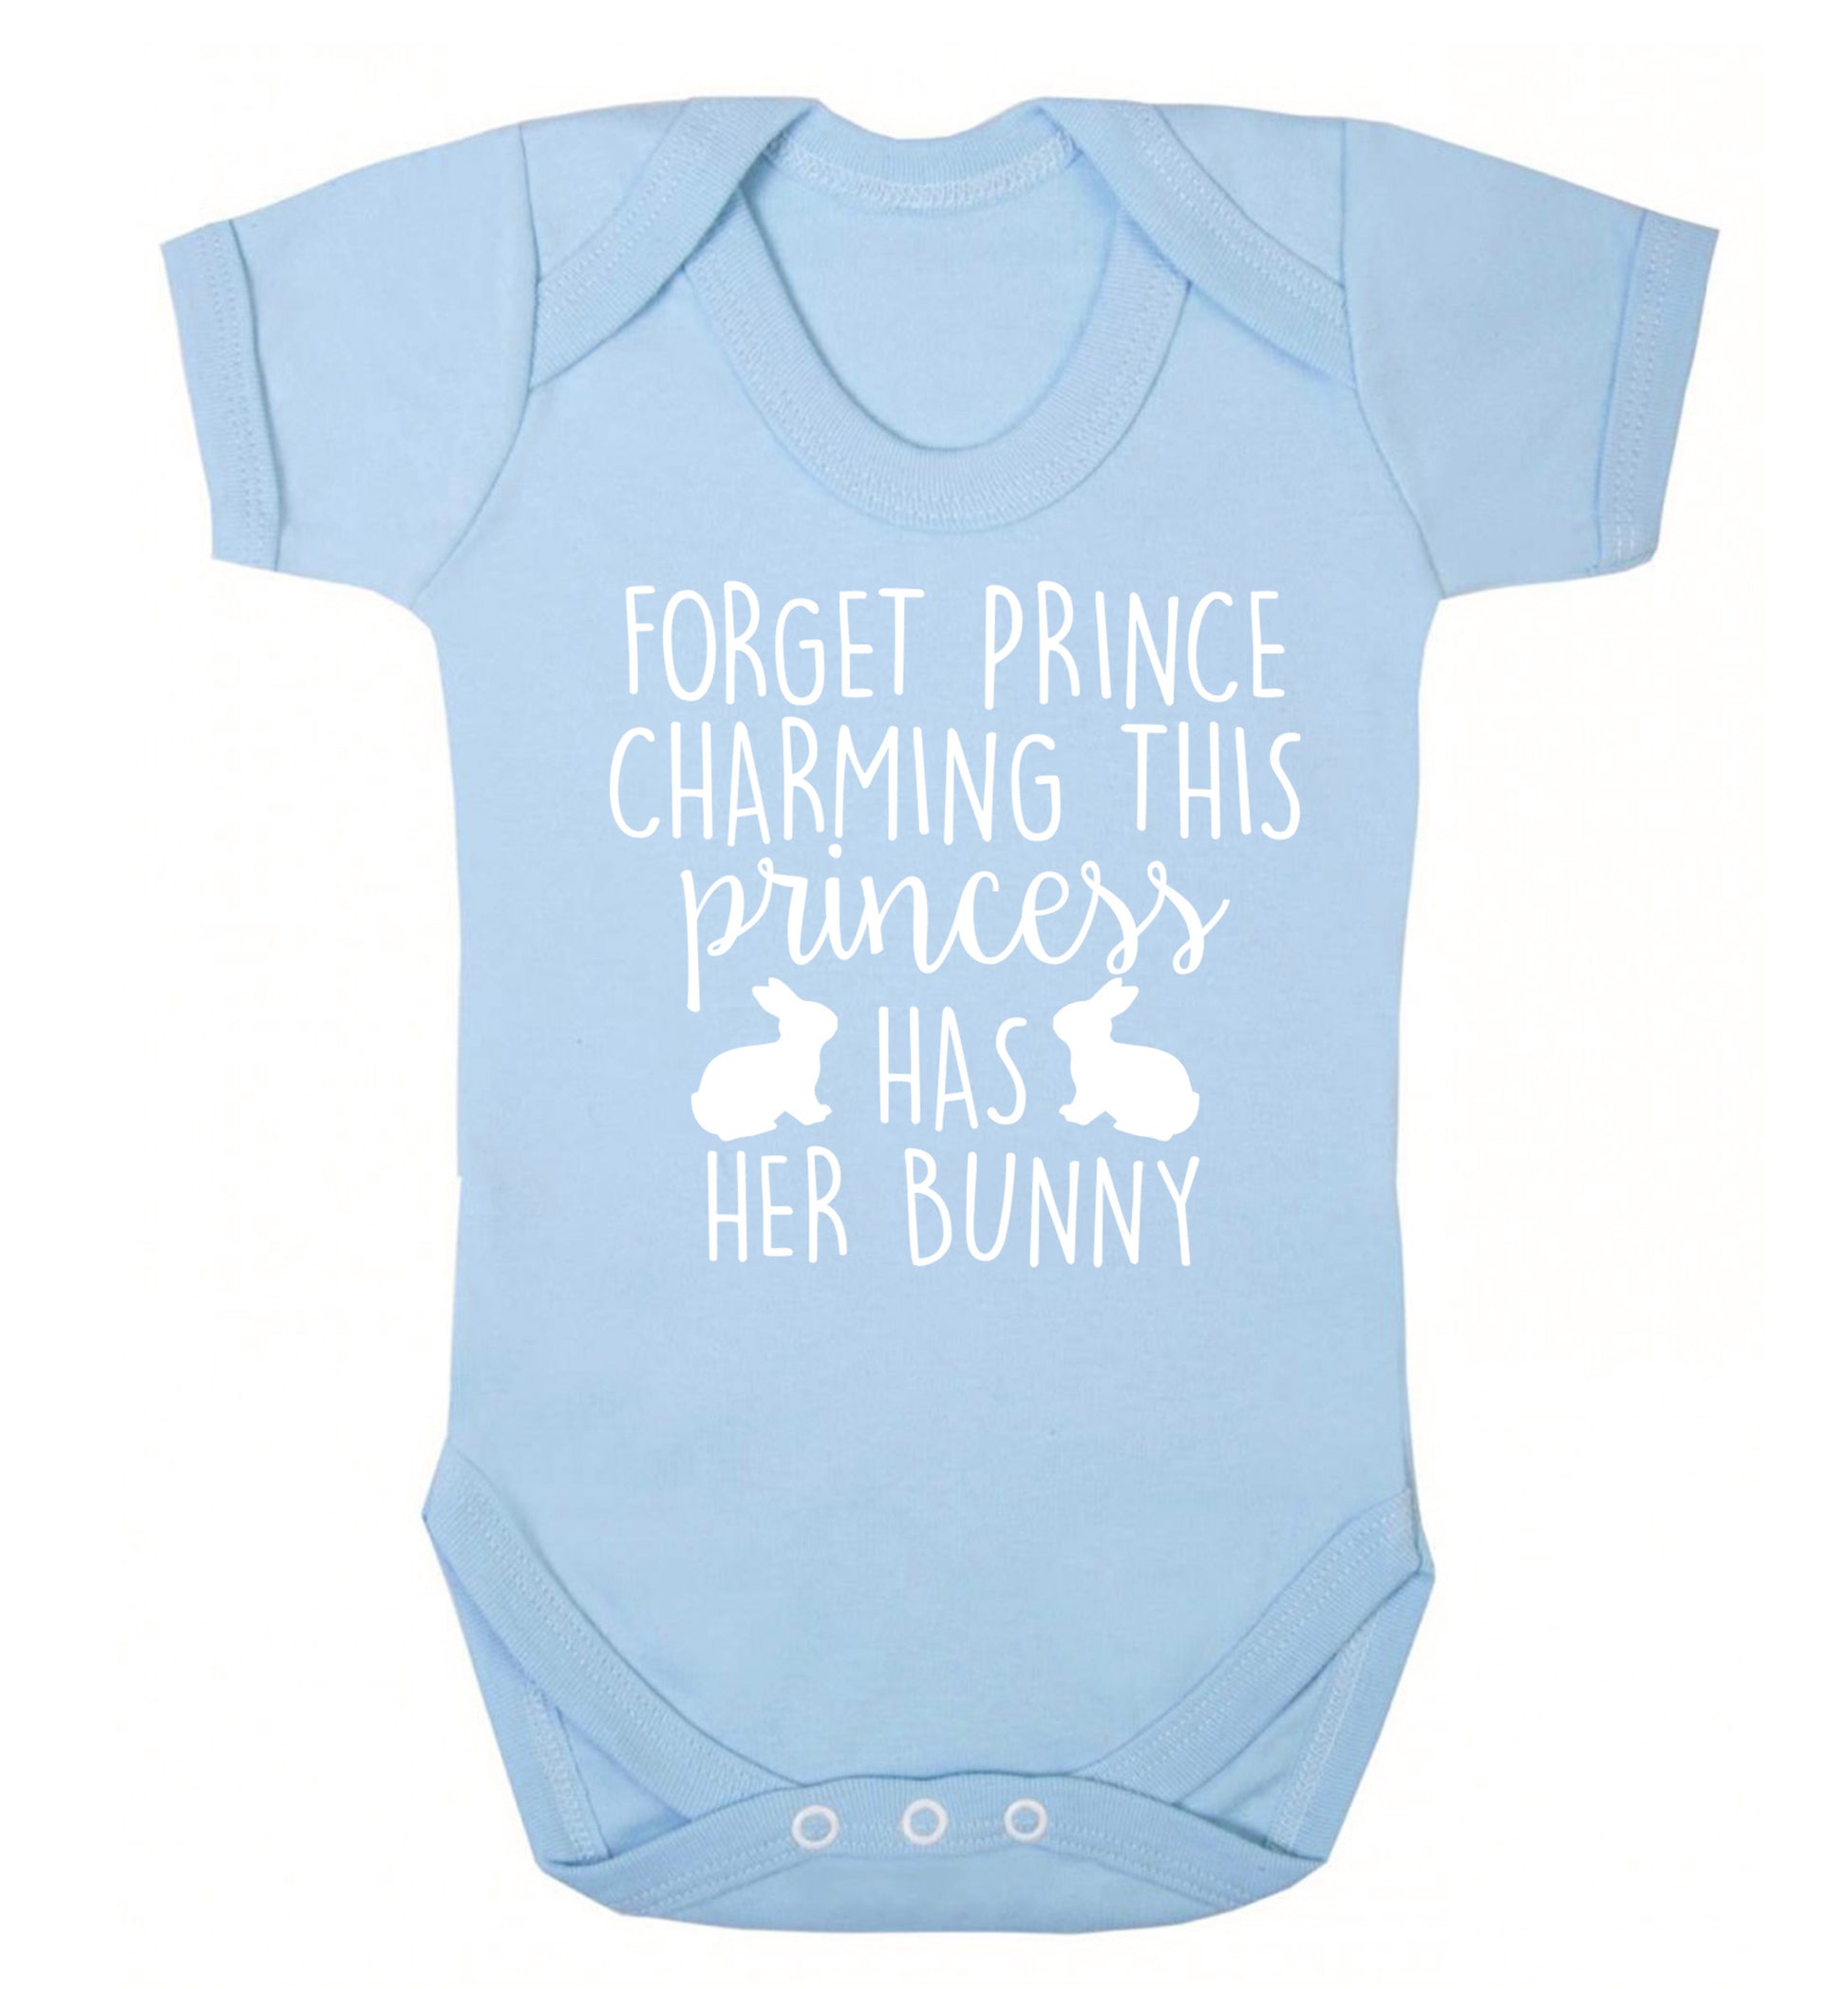 Forget prince charming this princess has her bunny Baby Vest pale blue 18-24 months